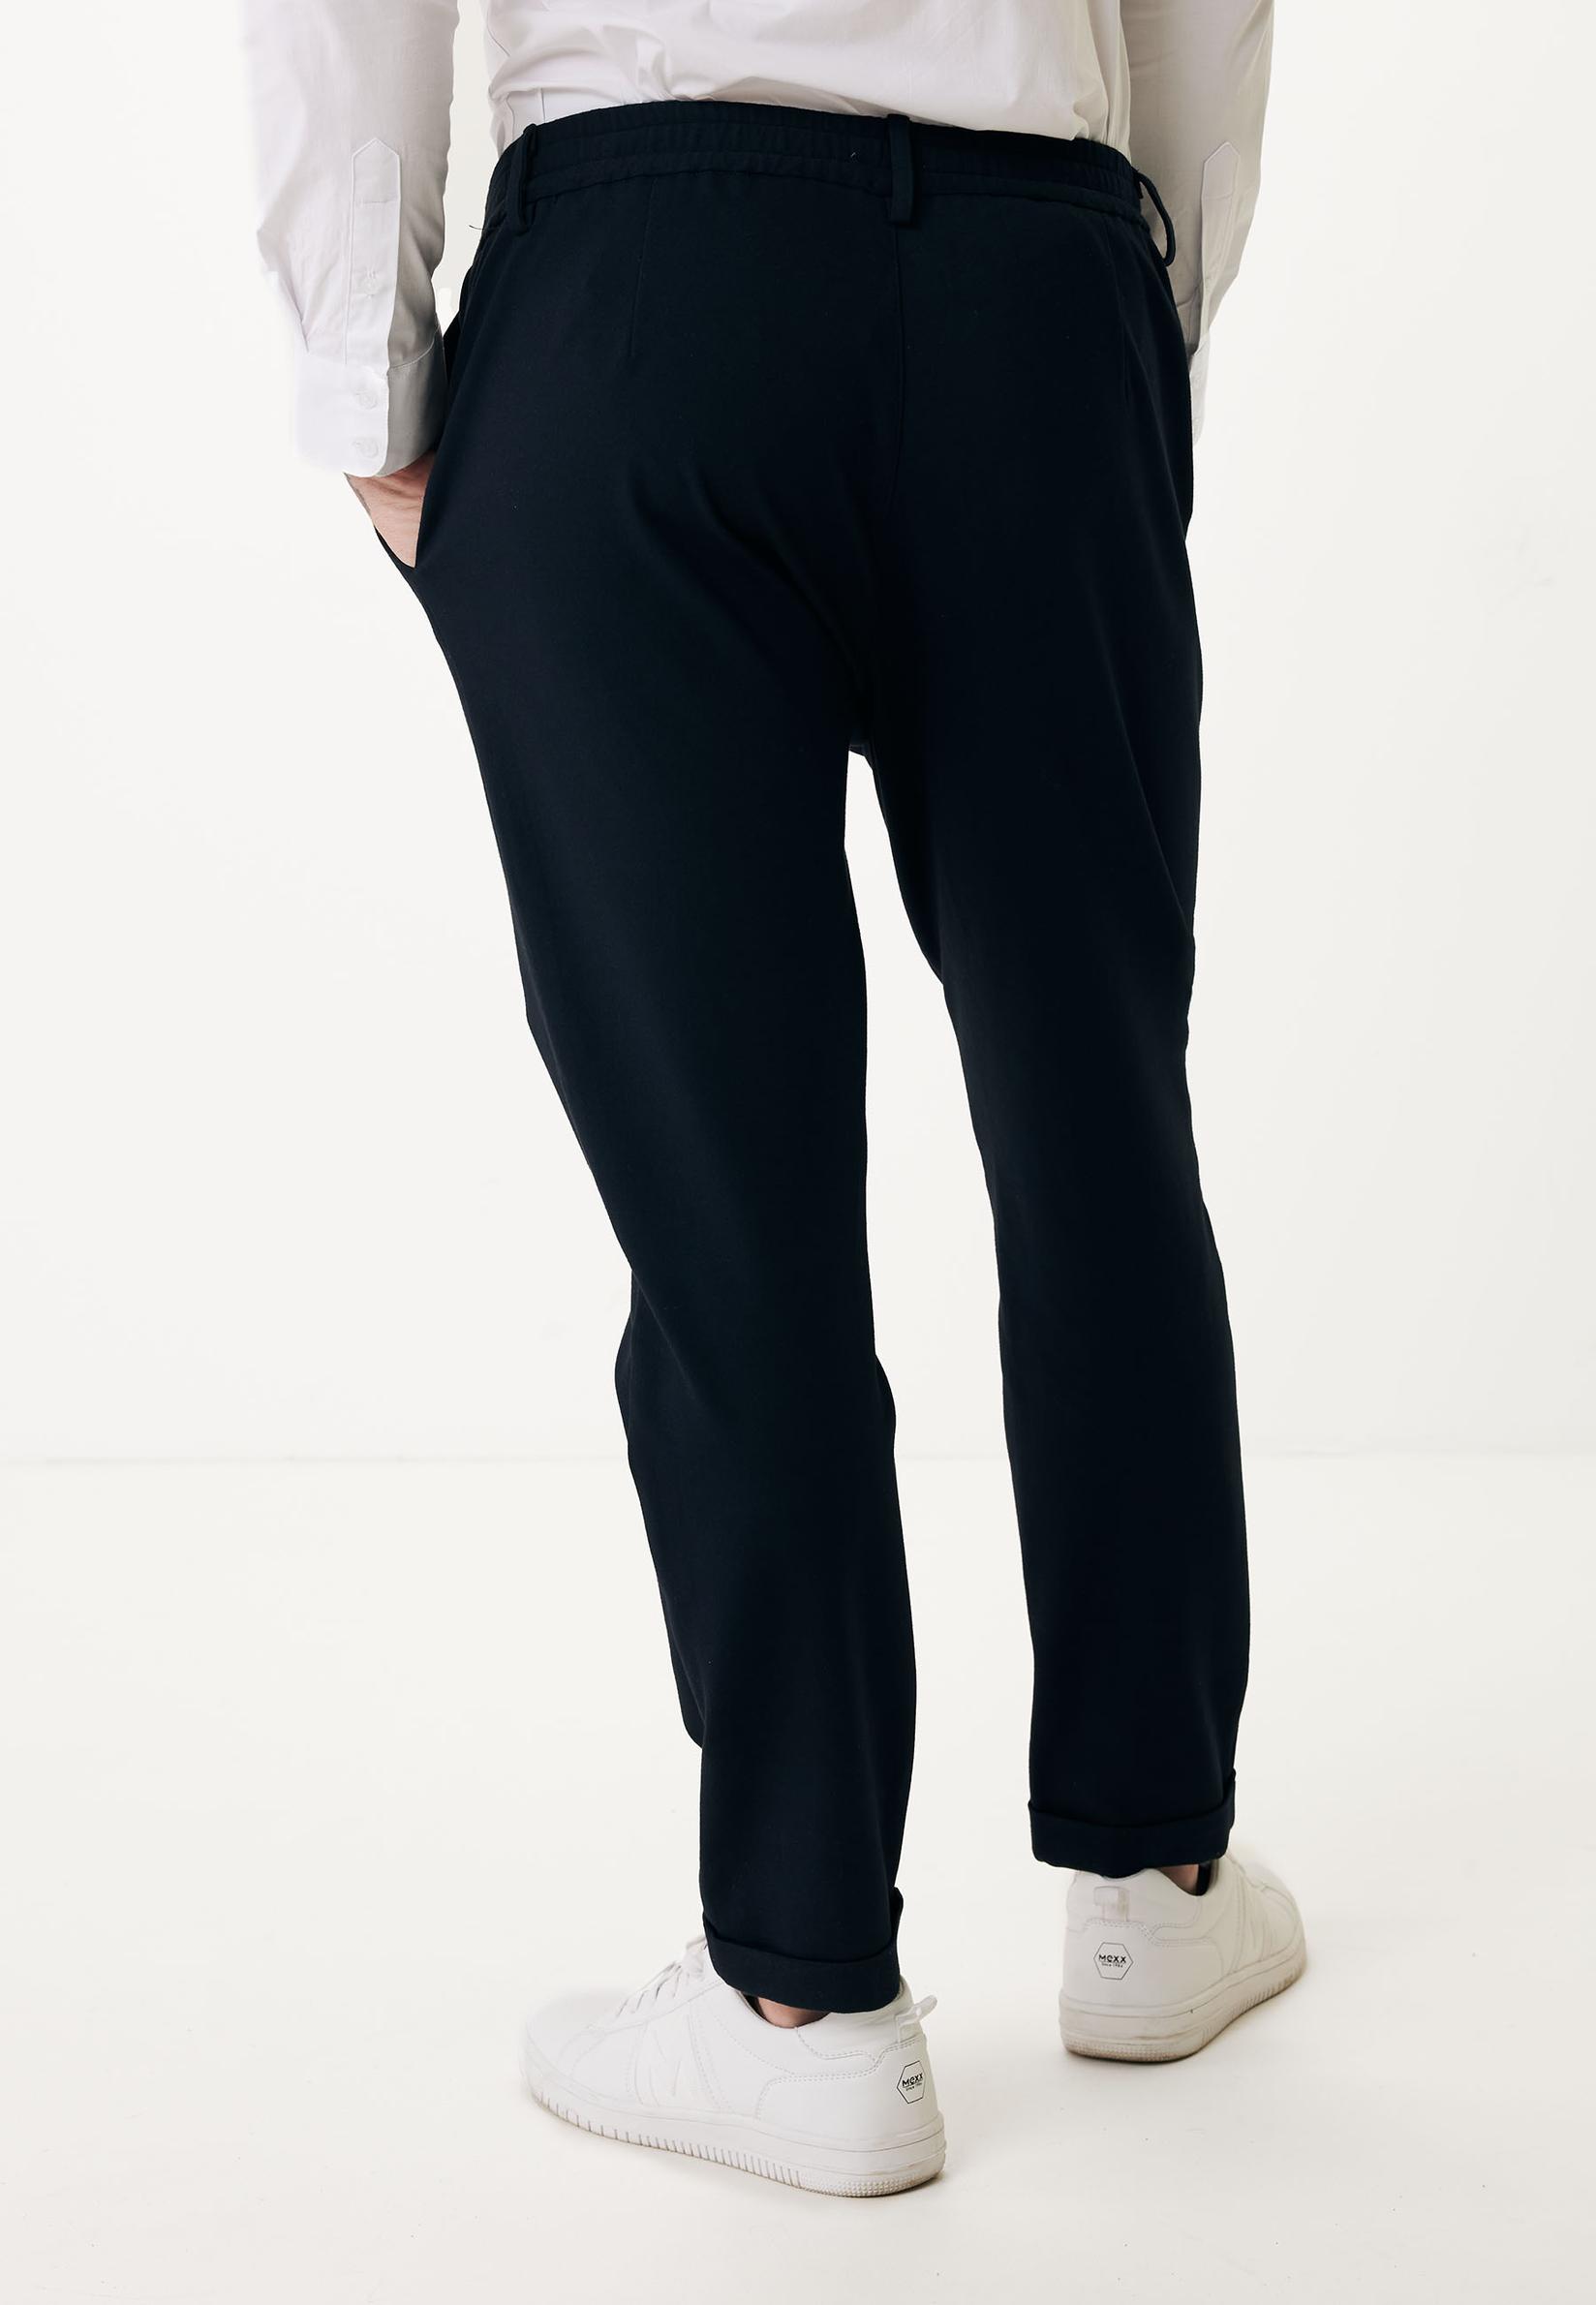 Selected image for MEXX Muške pantalone Stretch fabric teget